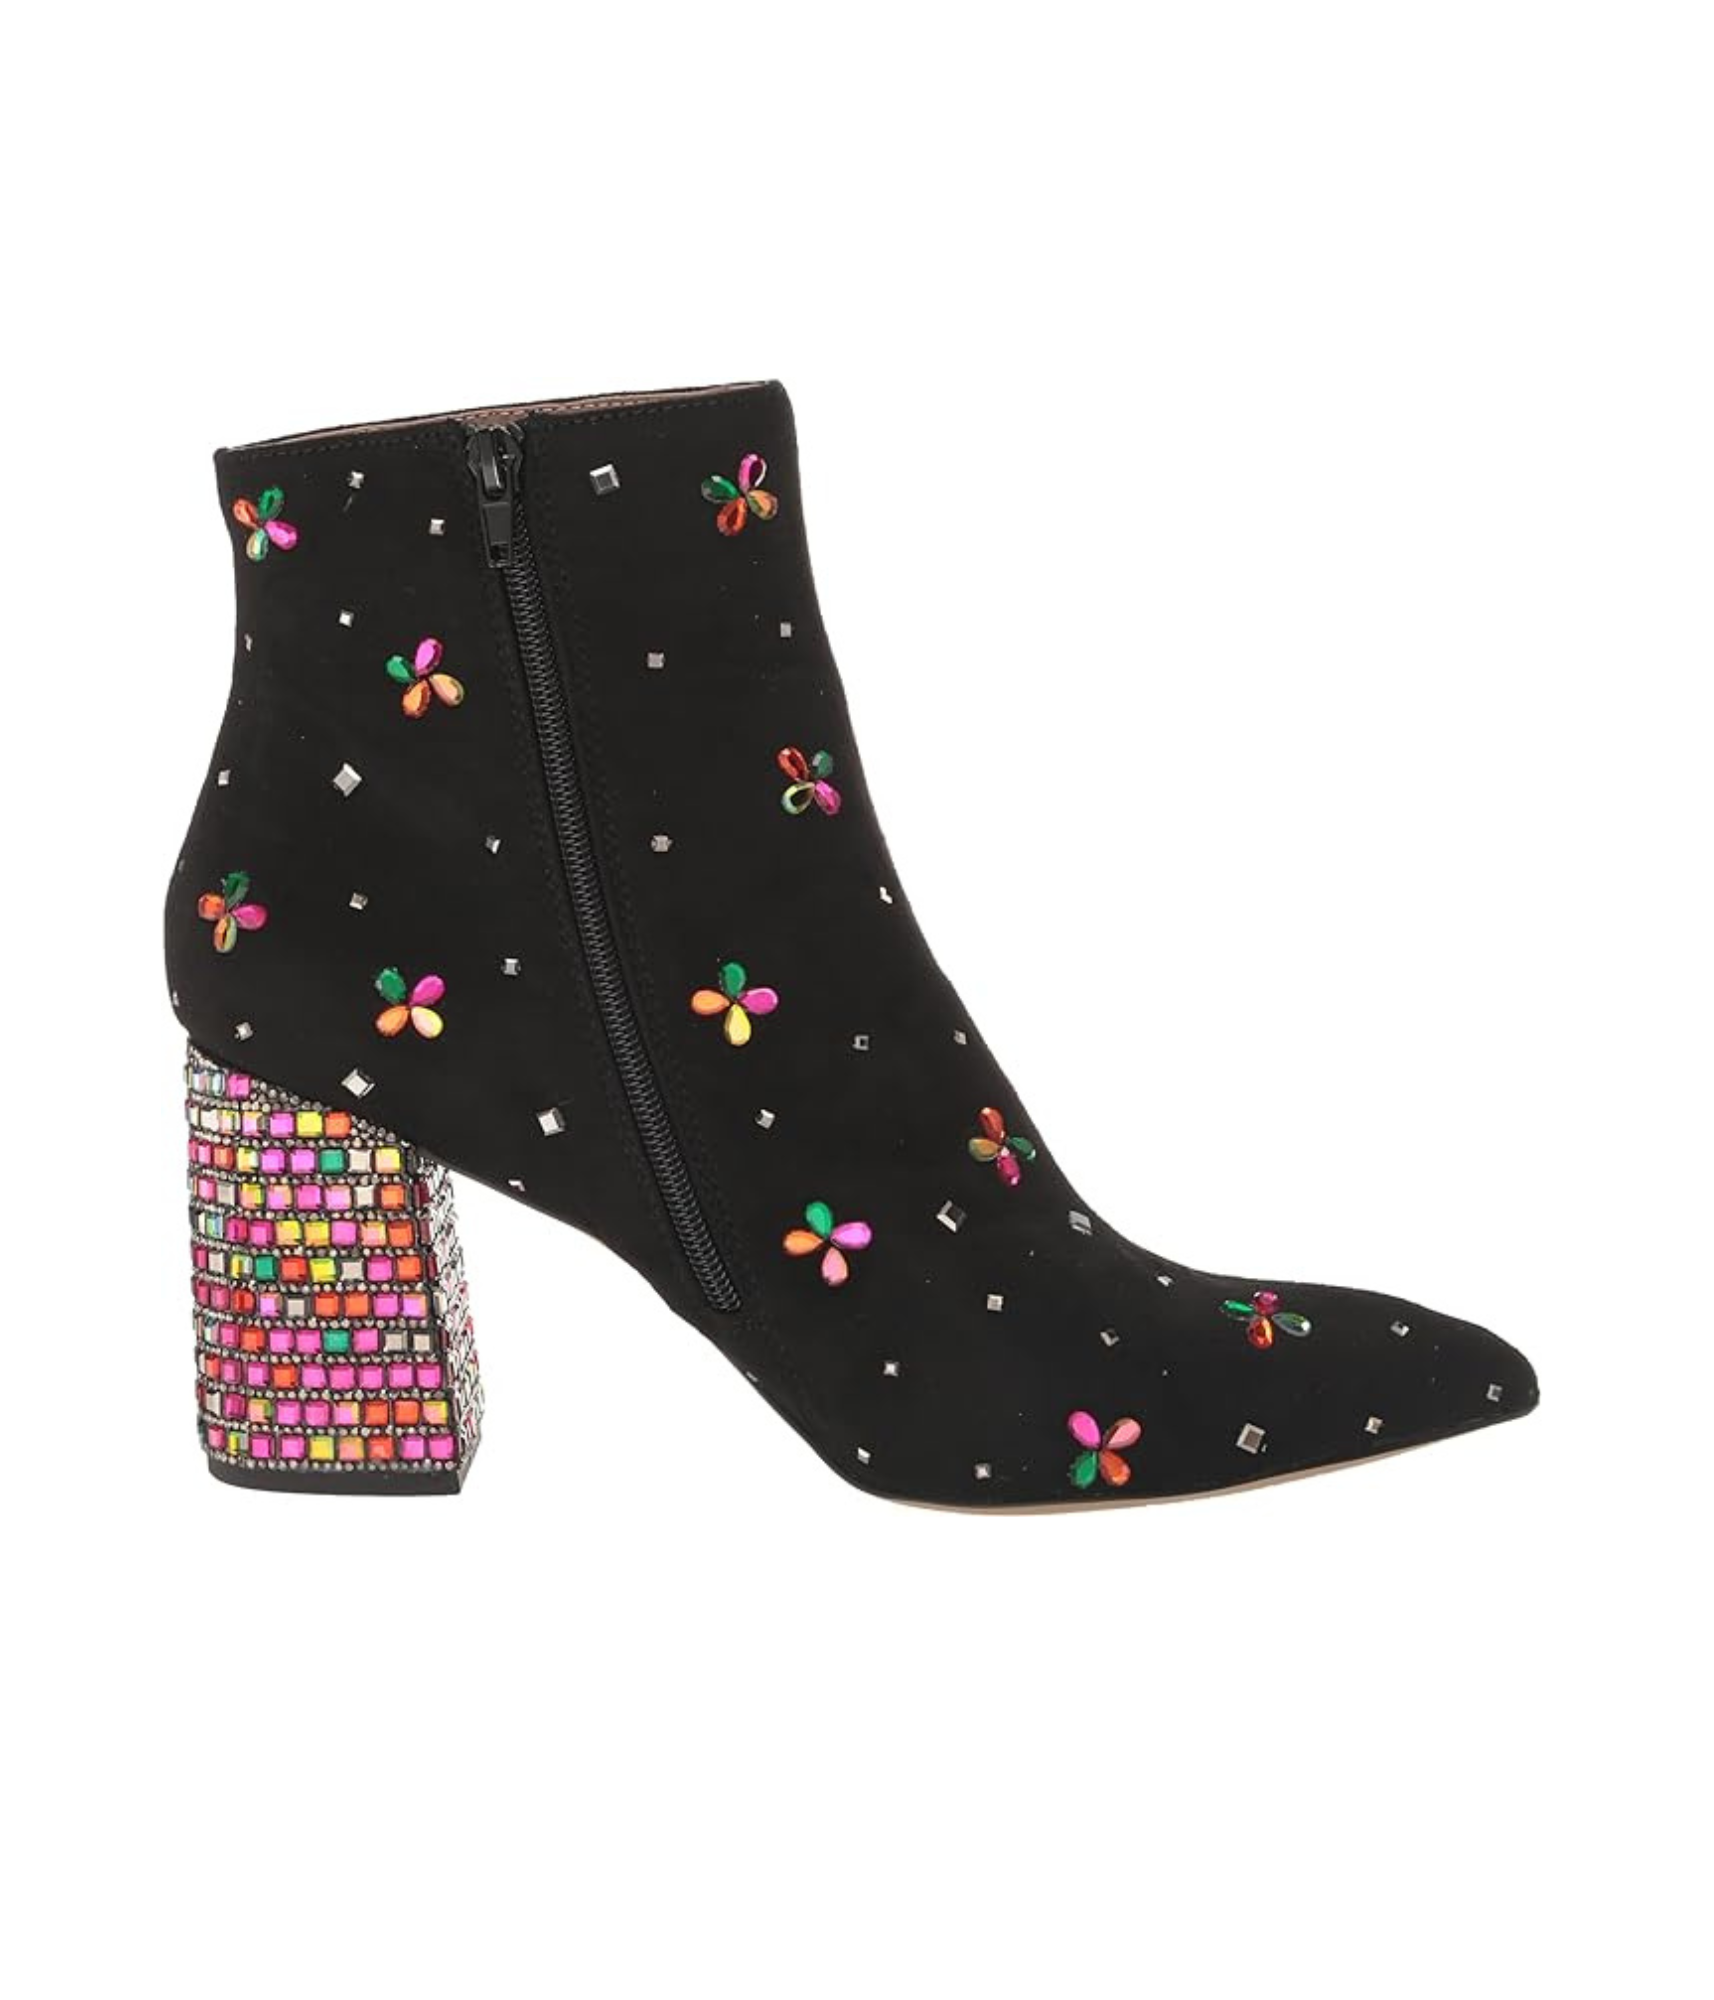 Joise Rhinestone Ankle Boots in Multi